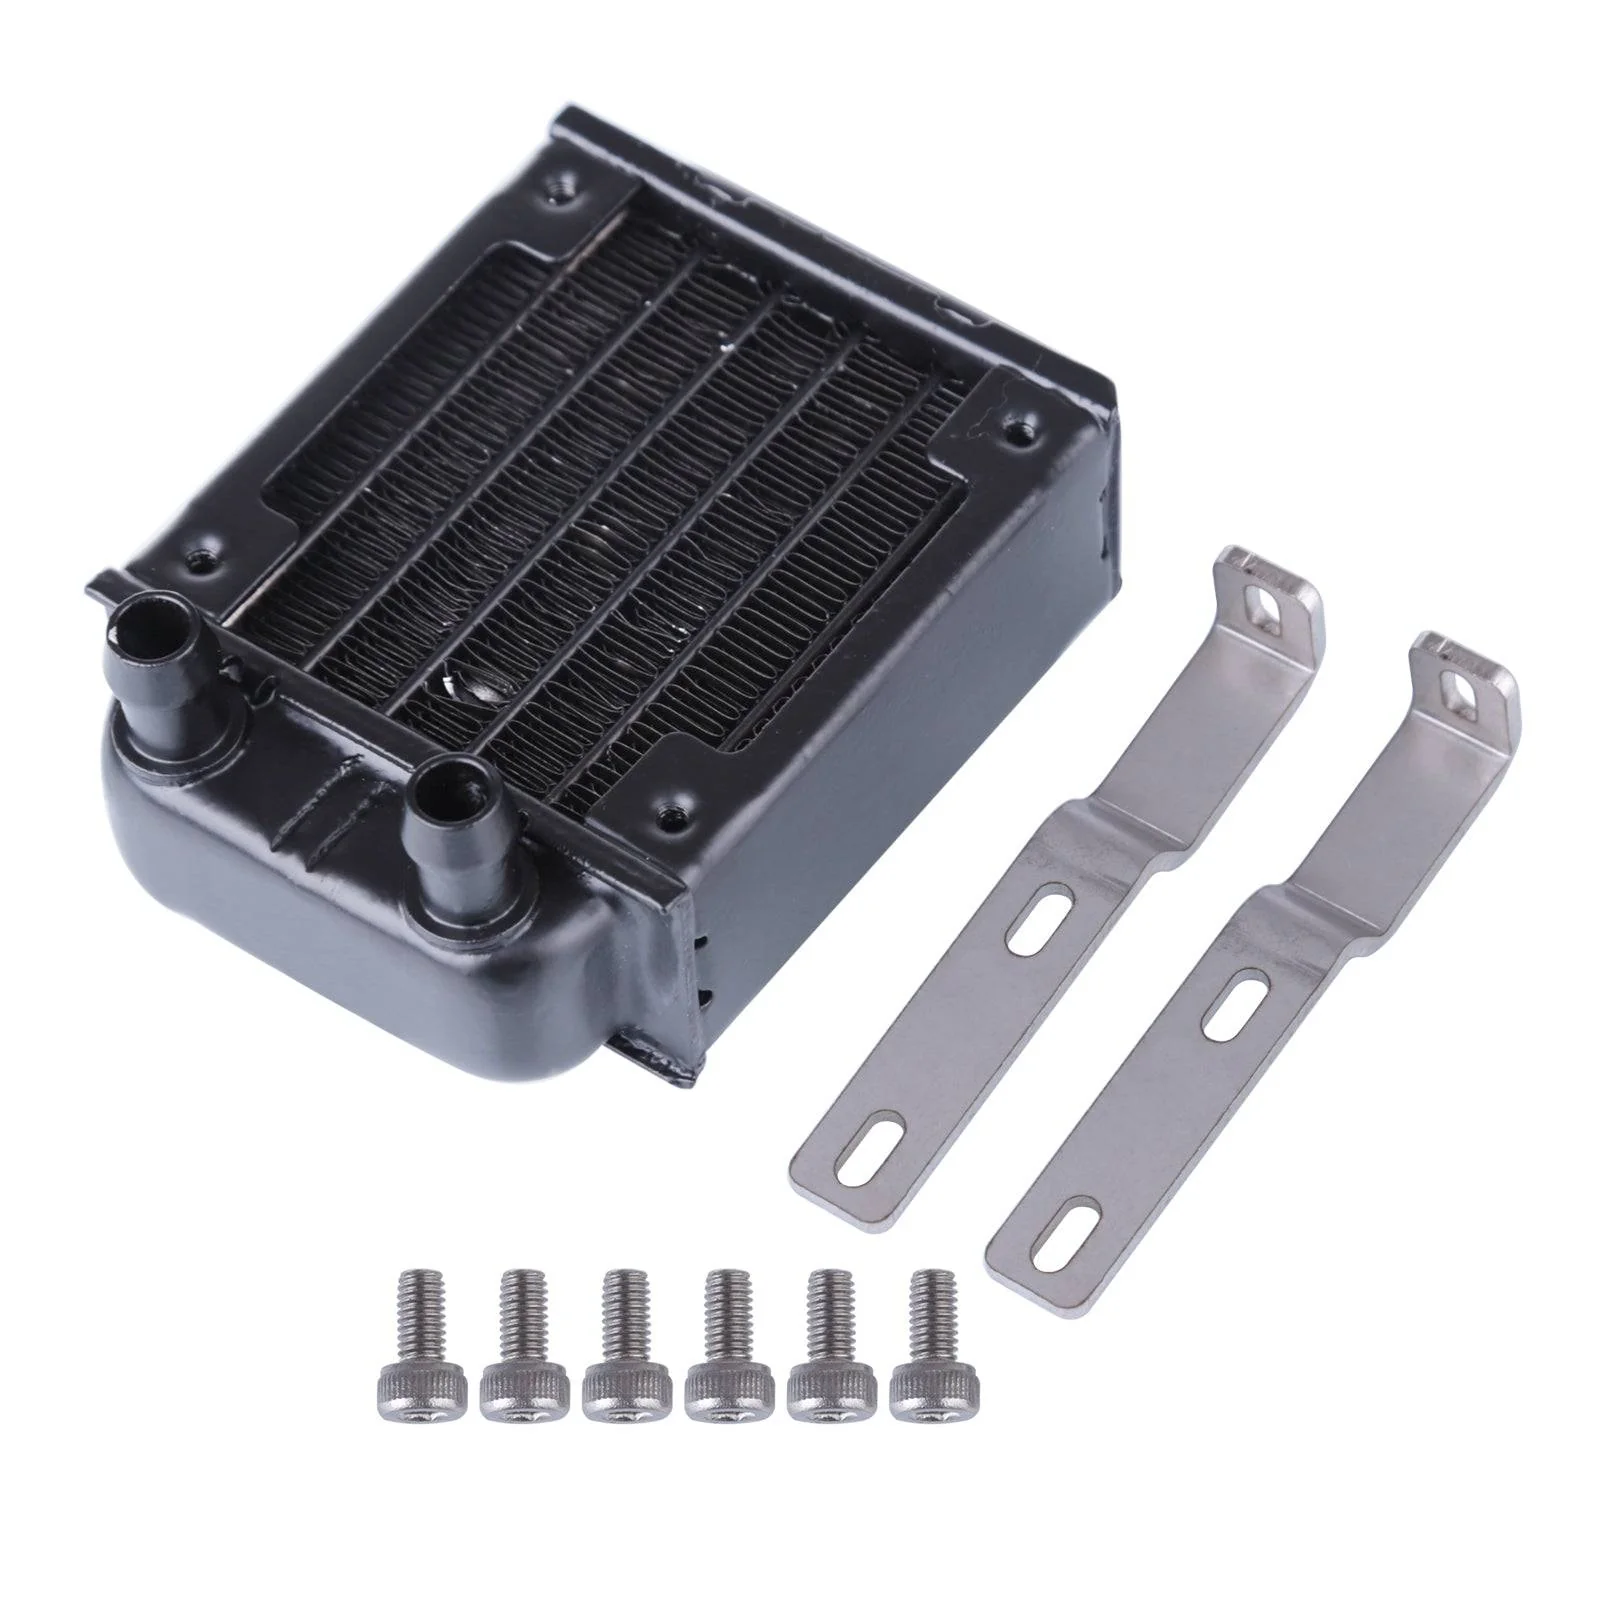 8.3 x 6 x 3.7cm Water-cooled Tank Radiator with Bracket Kit for Toyan Single-cylinder 4-Stroke Engine 1